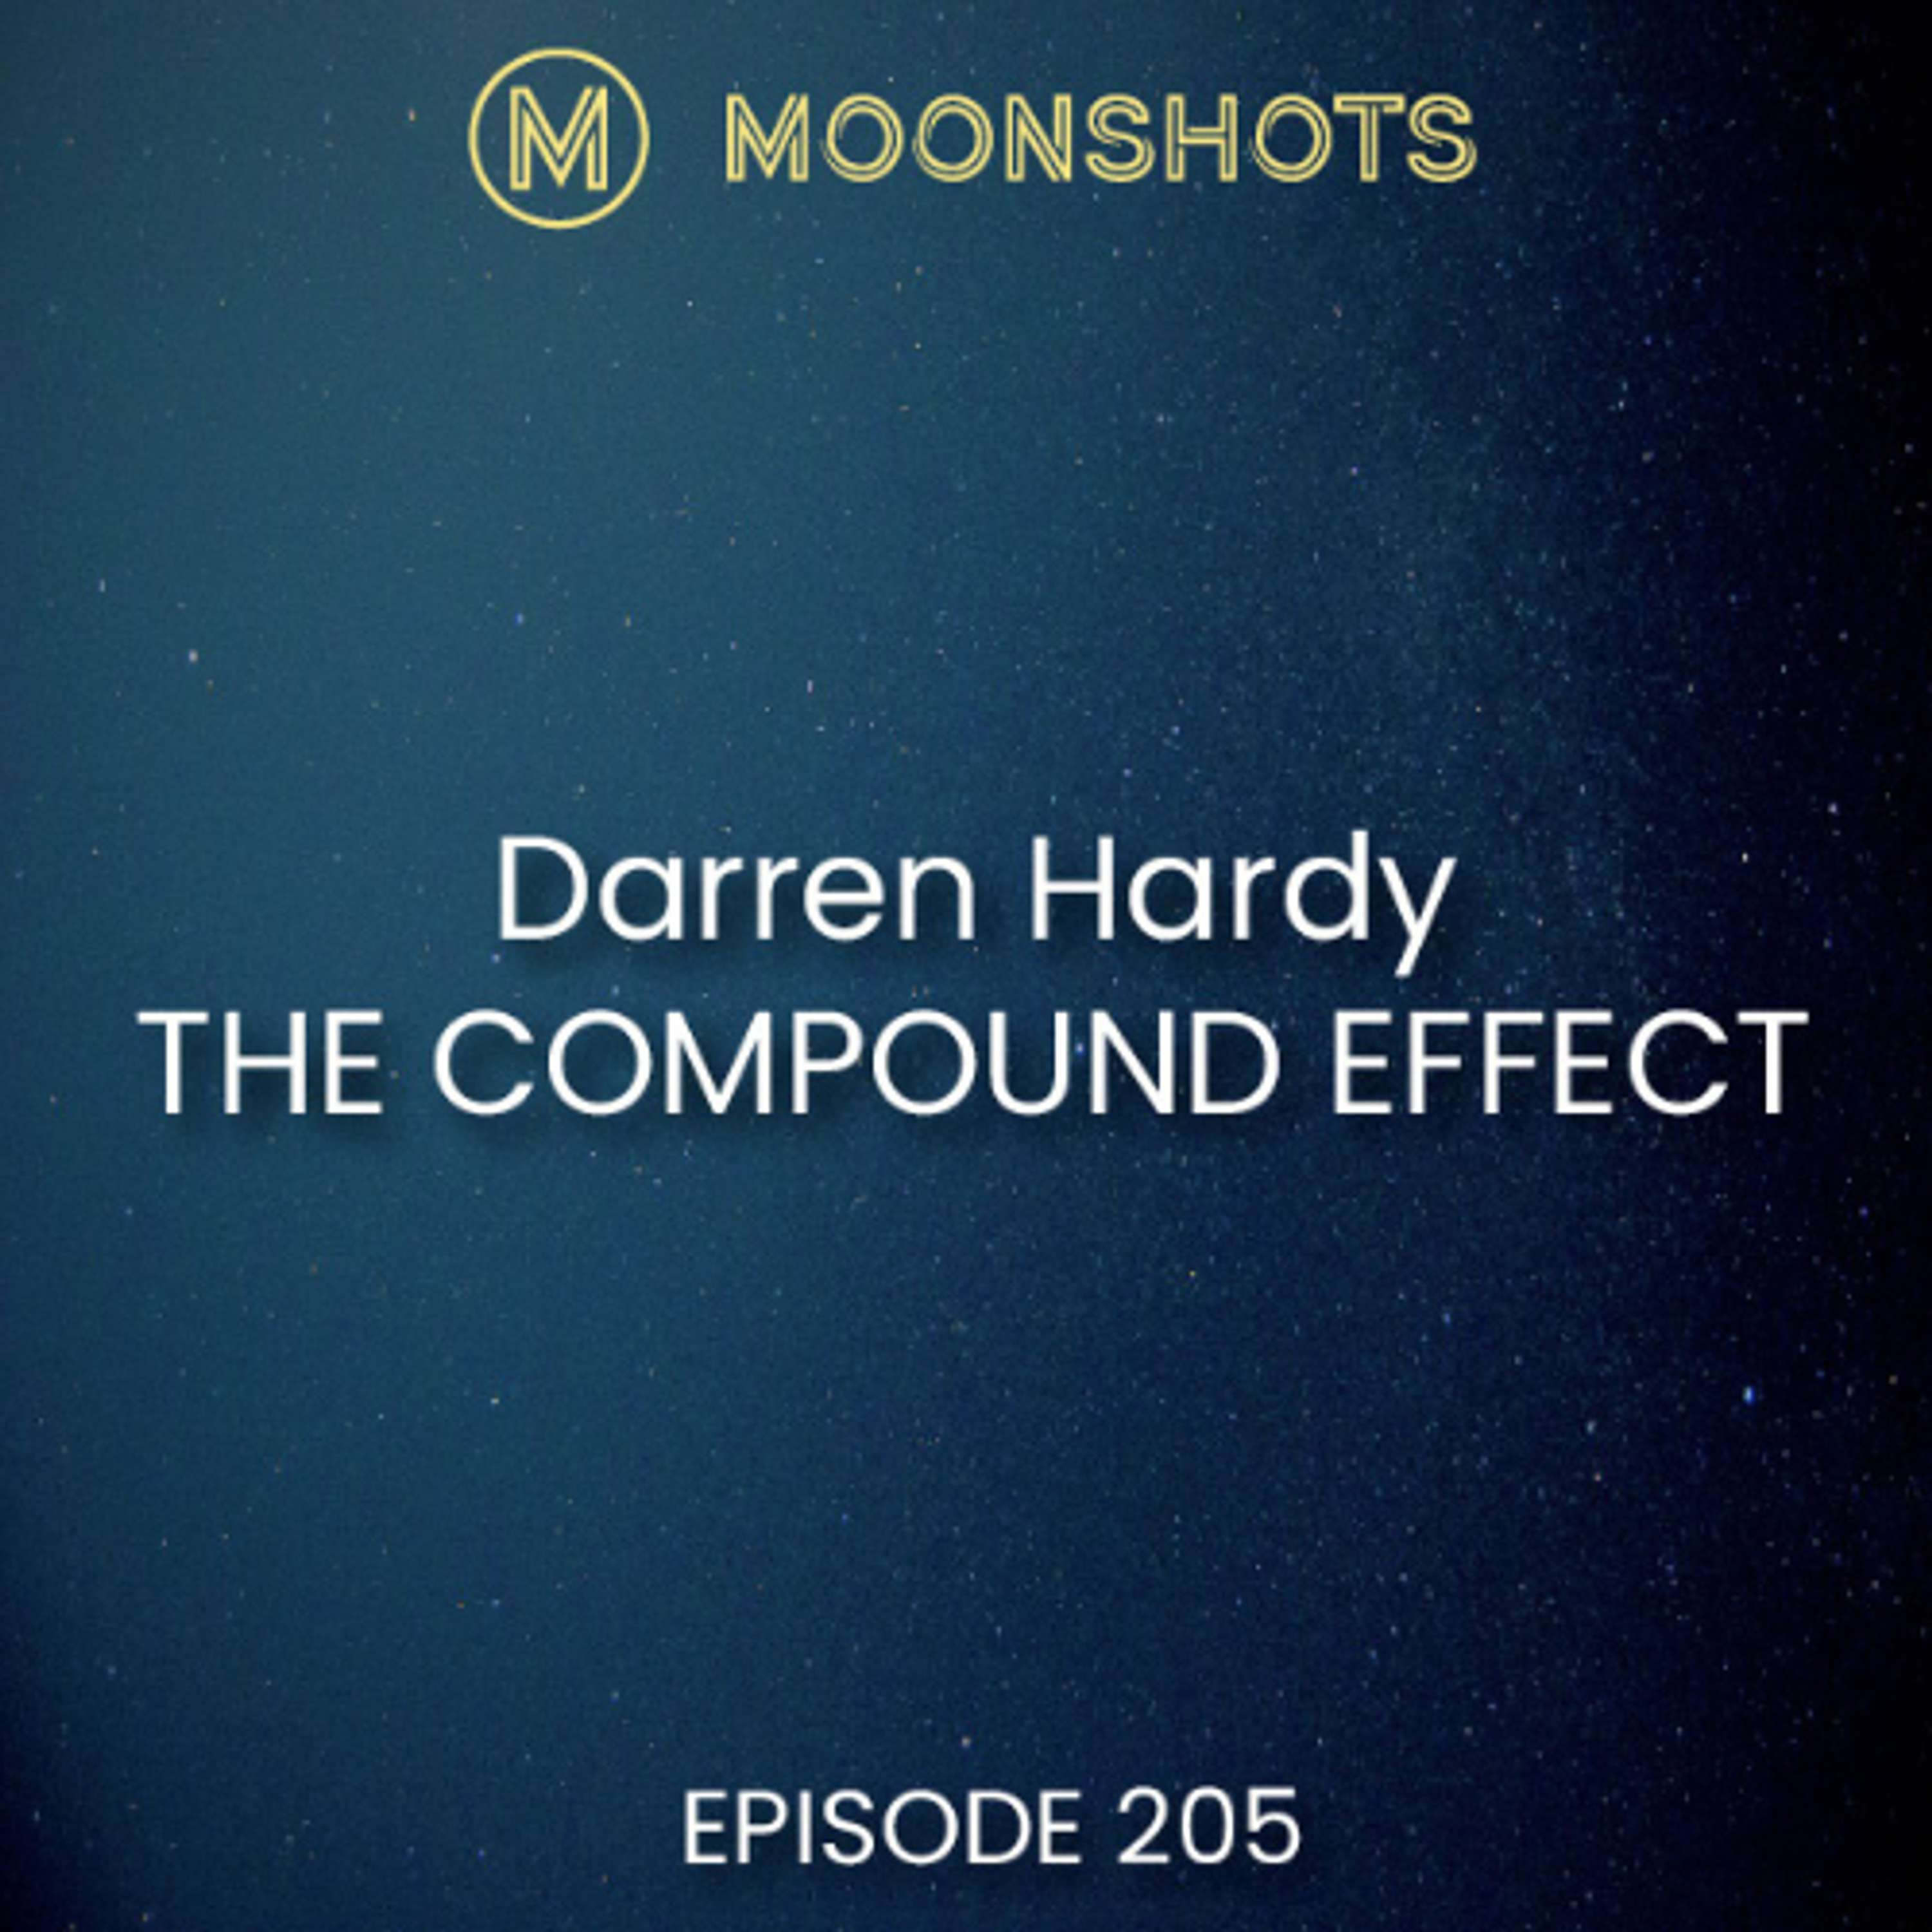 The Compound Effect by Darren Hardy. Jumpstart Your Income, Your Life, Your Success